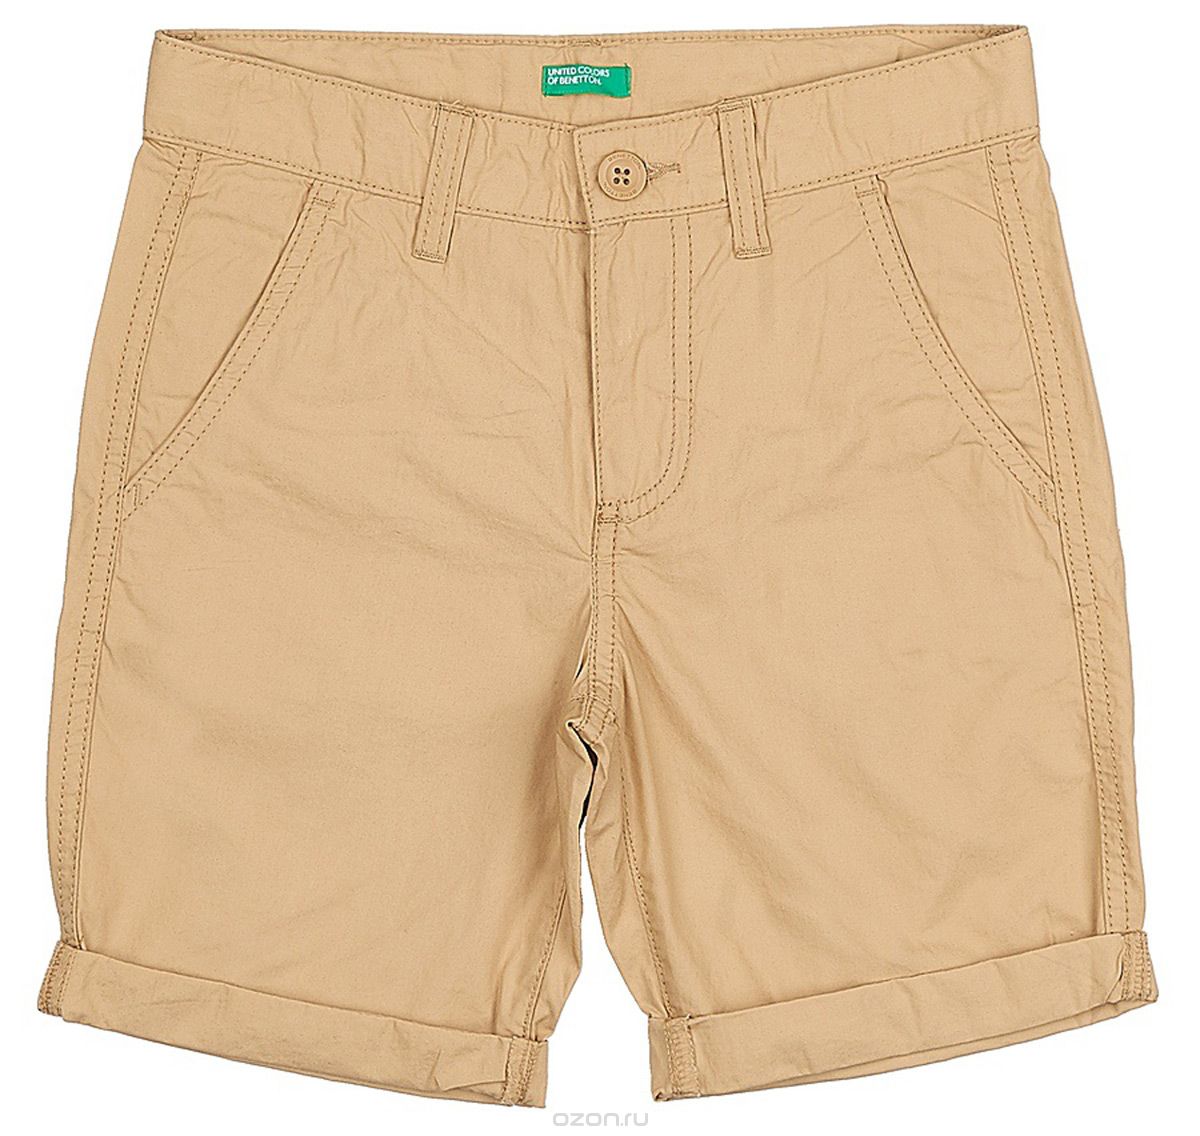    United Colors of Benetton, : . 4AC759270_393.  160